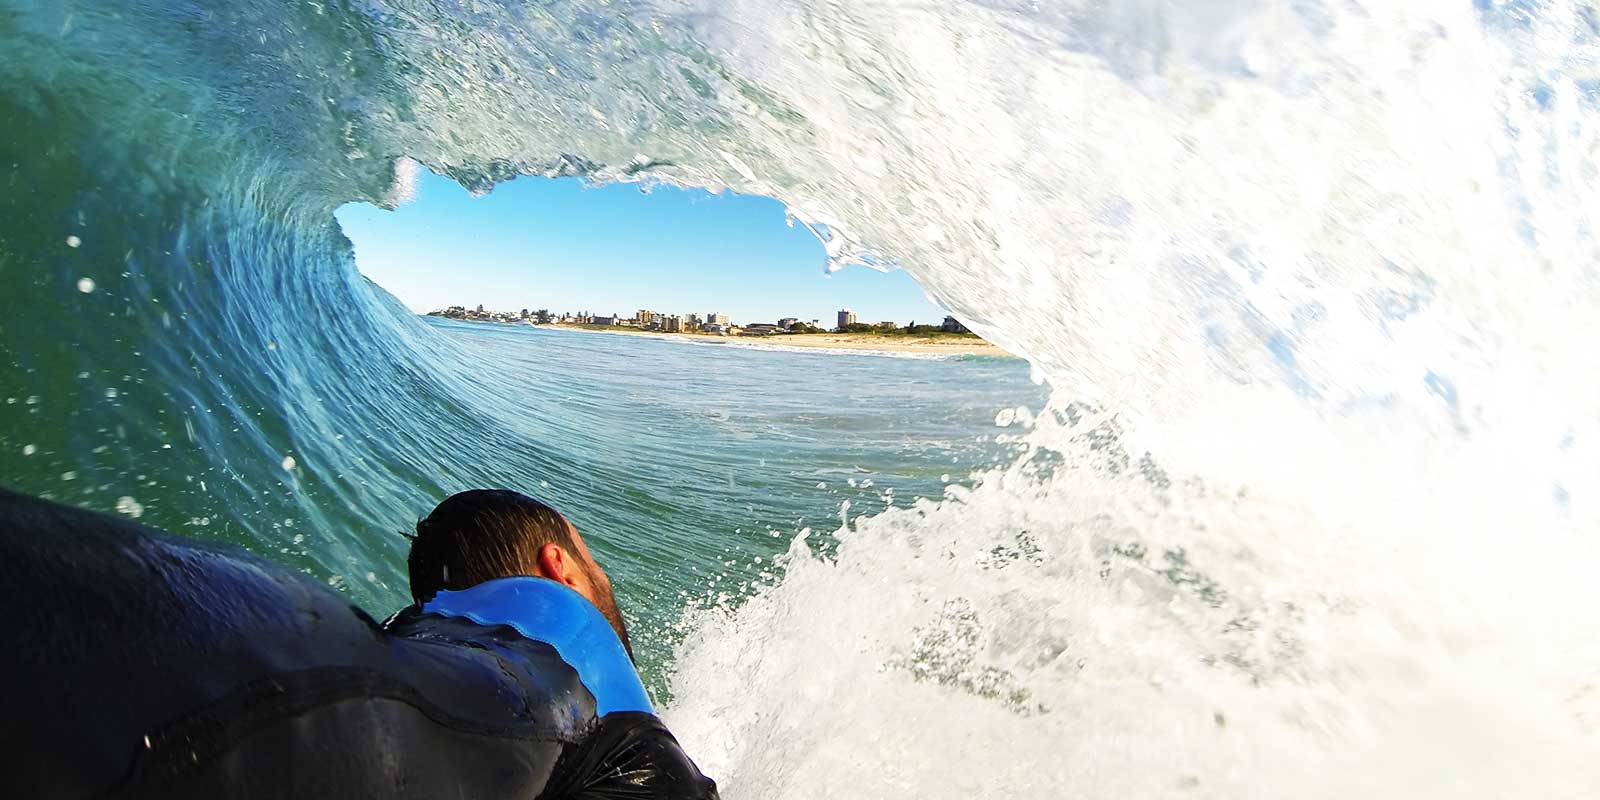 The Inertia Shares: A Bodysurfers Guide When To Use a Handboard